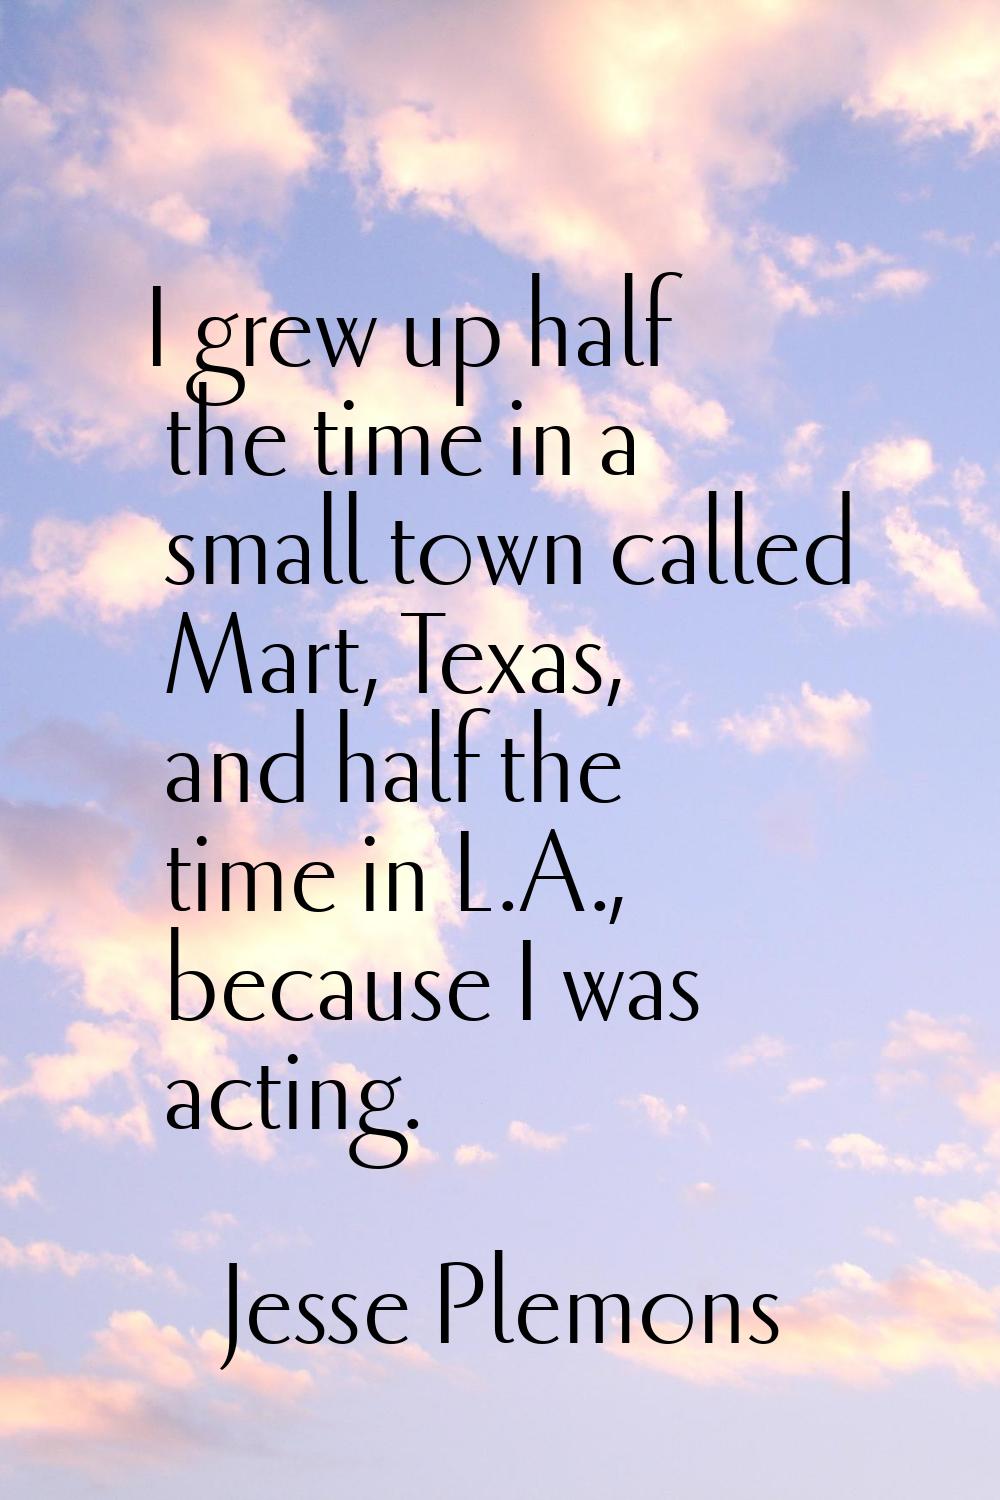 I grew up half the time in a small town called Mart, Texas, and half the time in L.A., because I wa